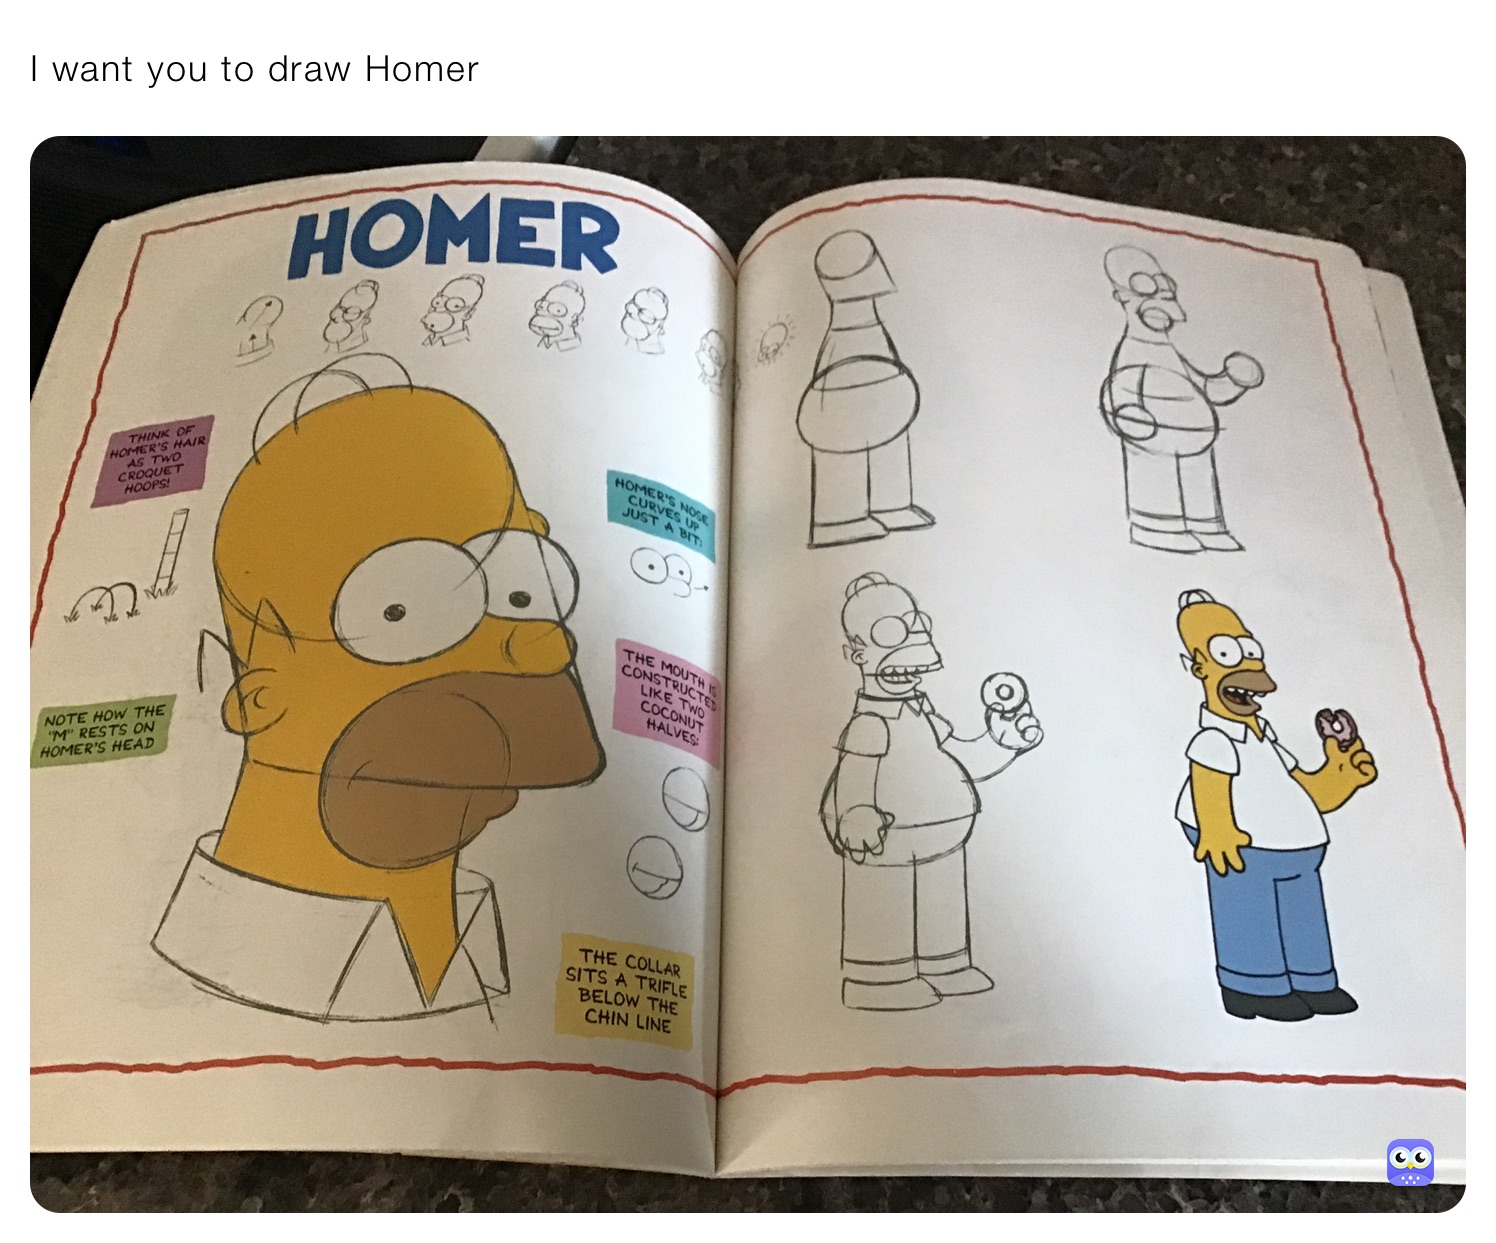 I want you to draw Homer